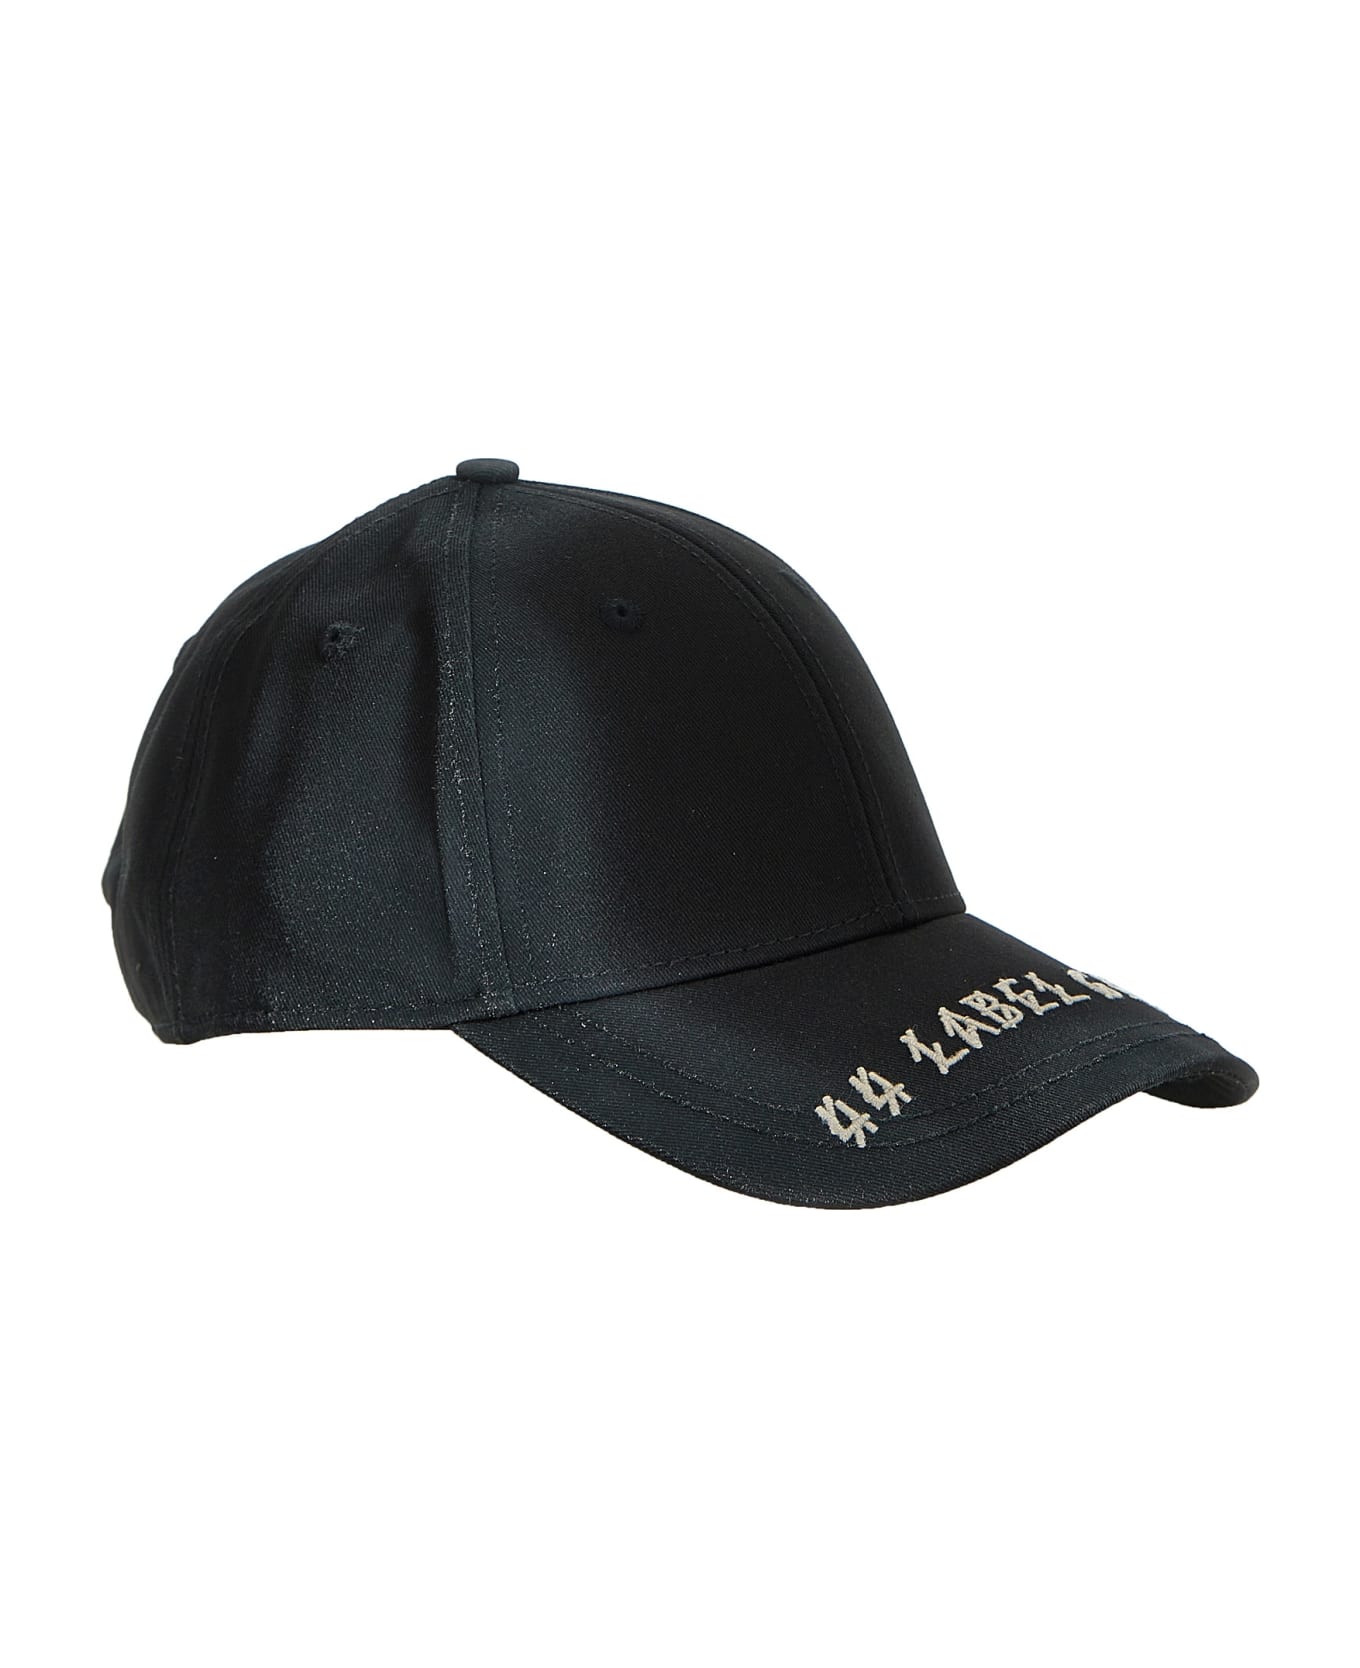 44 Label Group Logo Embroidery Cap - Black  